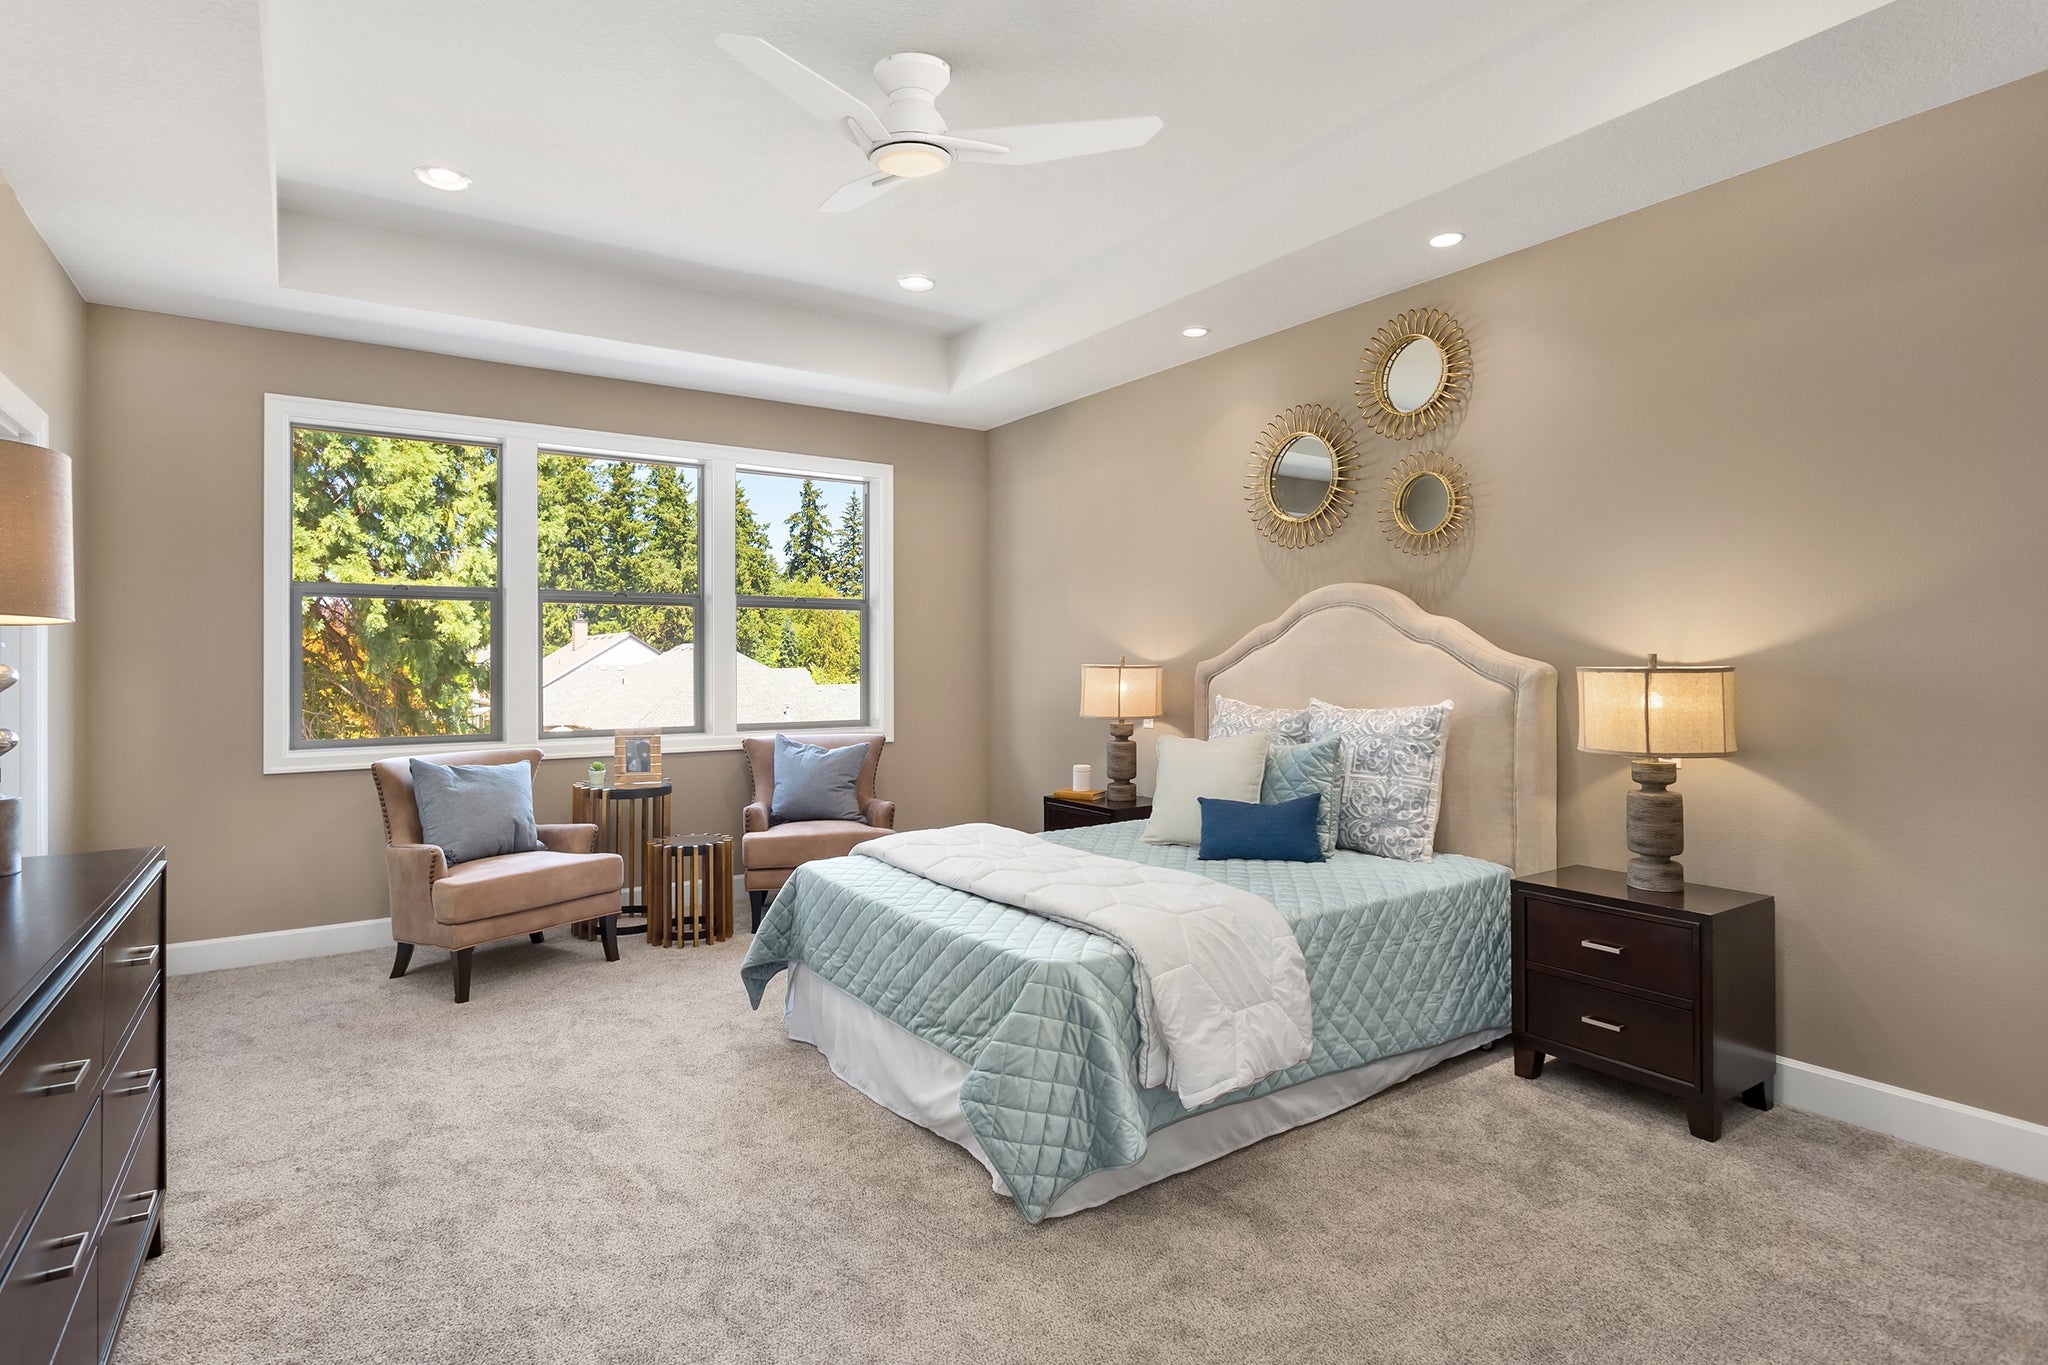 White Flush mount ceiling fan with remote and LED light is well matched to the mint green bed quilt and beige tones of the modern bedroom